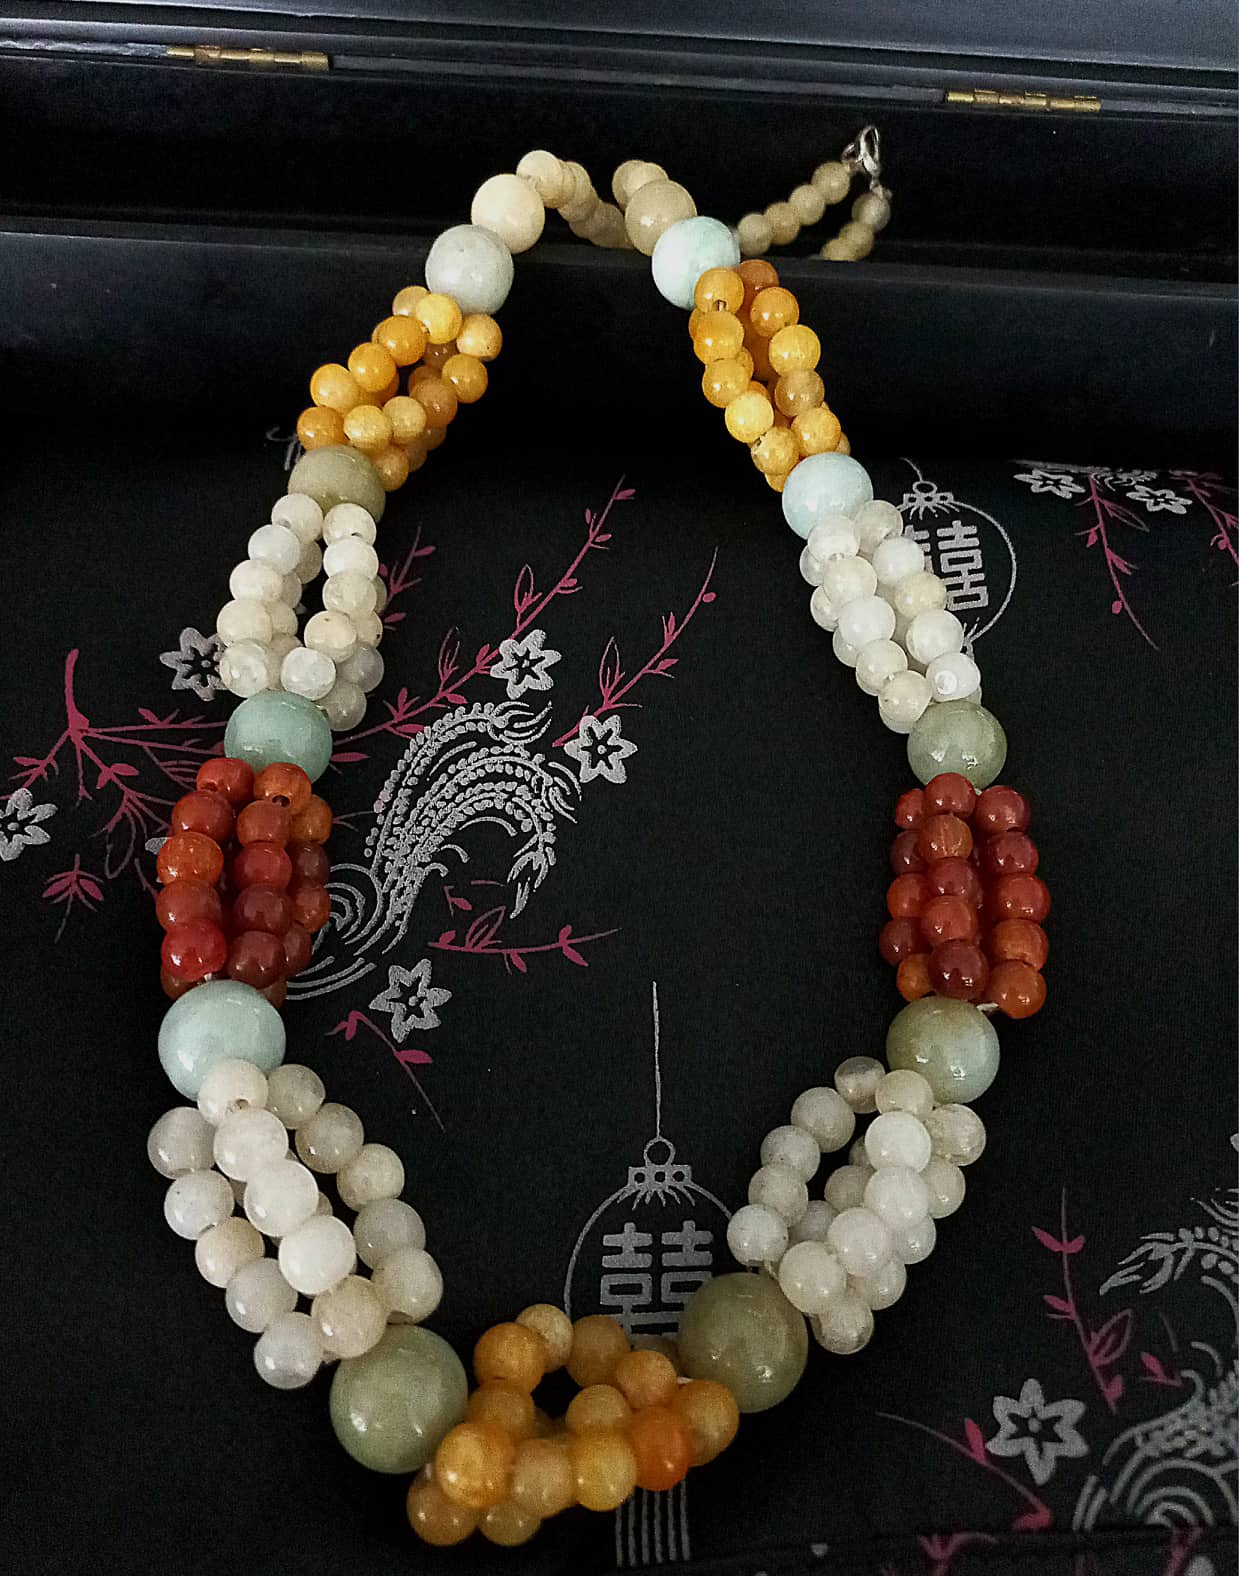 Burmese Jade Necklace Gemstone 25 in Artisinal Multicolor Large Beaded Jewelry 13mm & 8mm Beads by Myanmar Makers